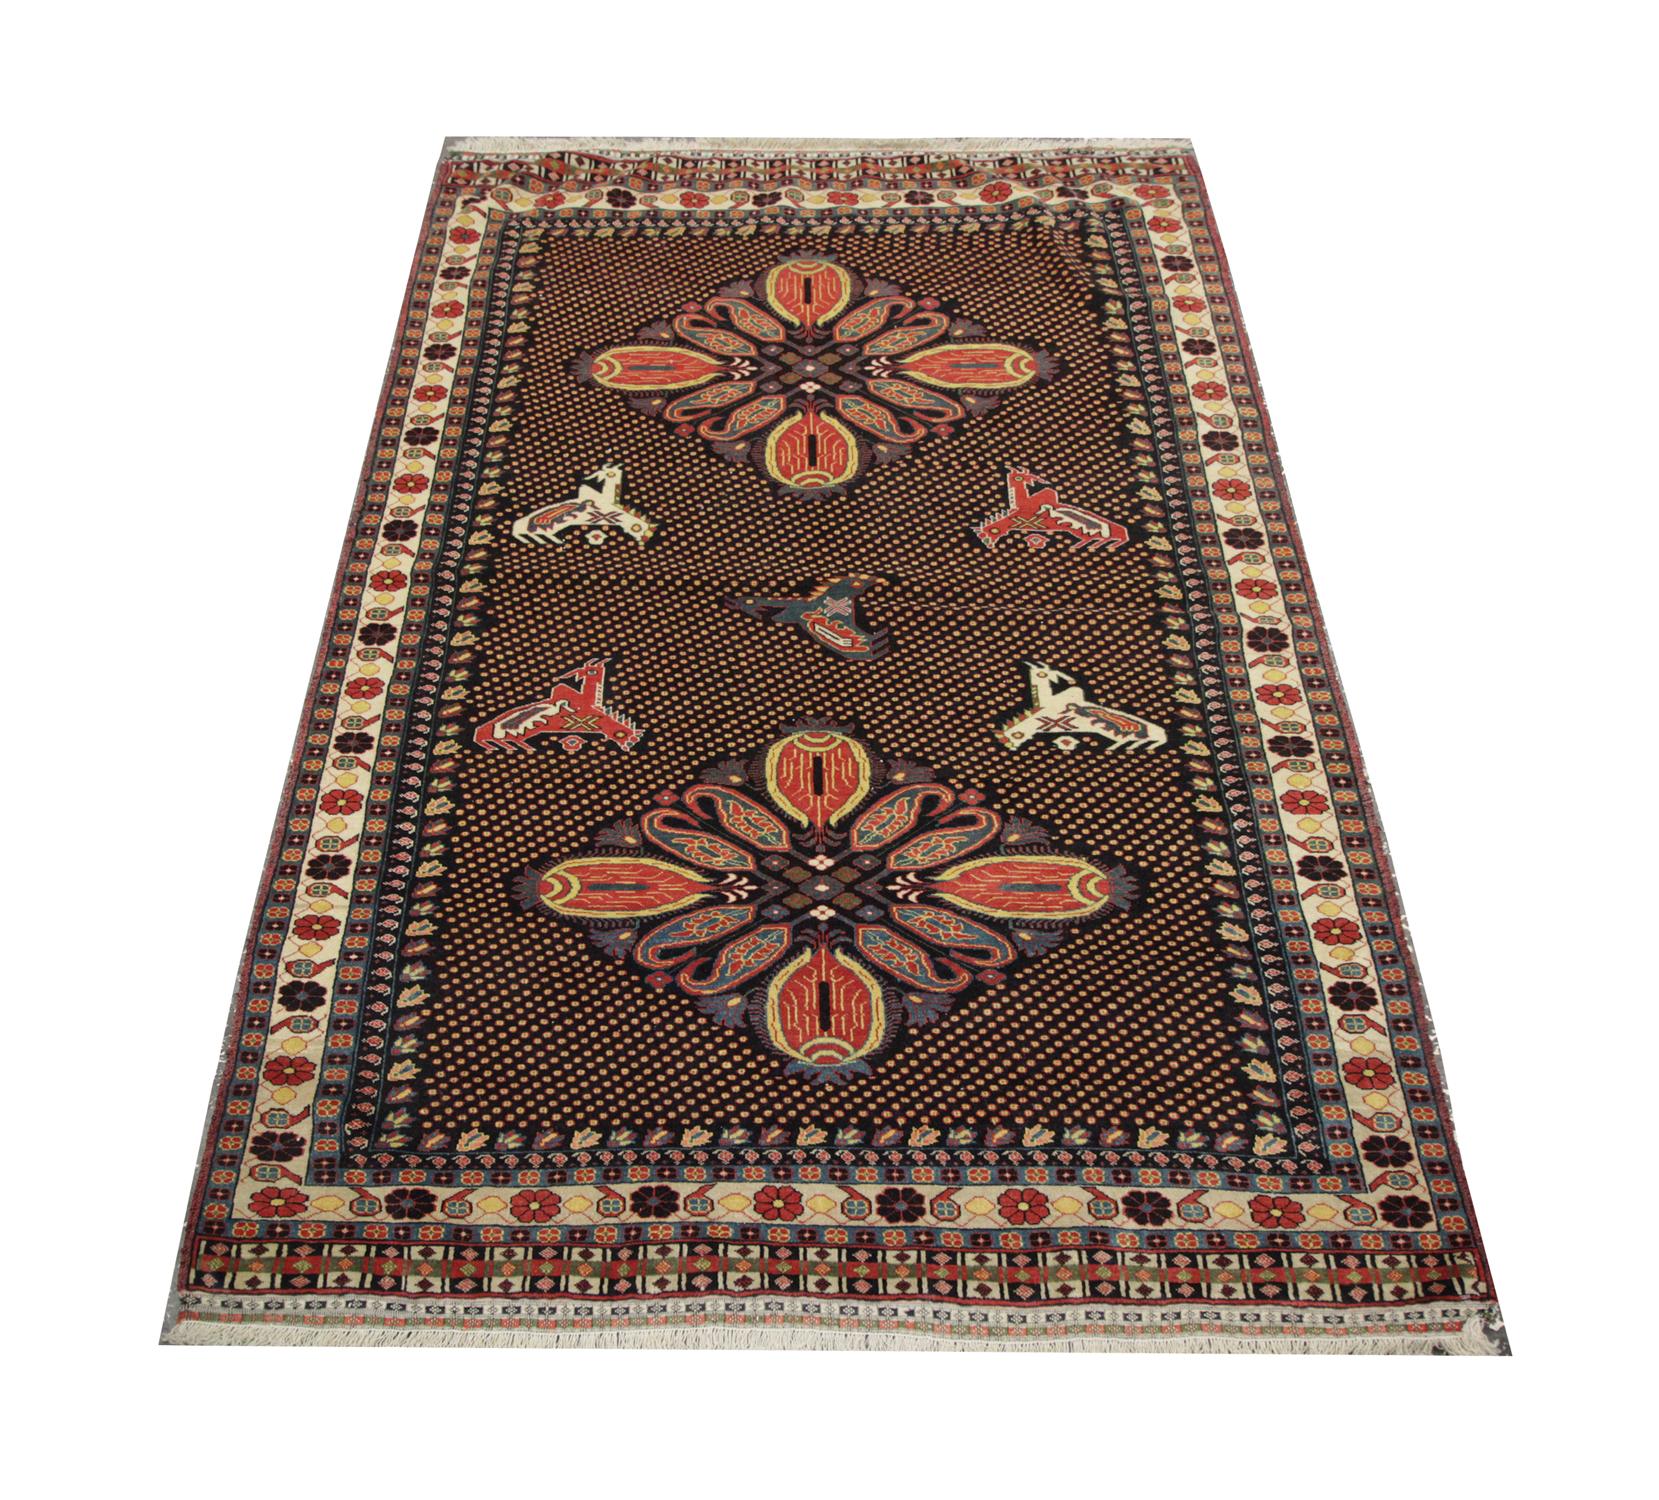 Antique rug with two stunning central motifs floats on a dark brown and yellow polka-dot background with contrasting tones of yellow and purple. A Handmade carpet with rich 6 layer border encloses this design with repeat patterns and subtle